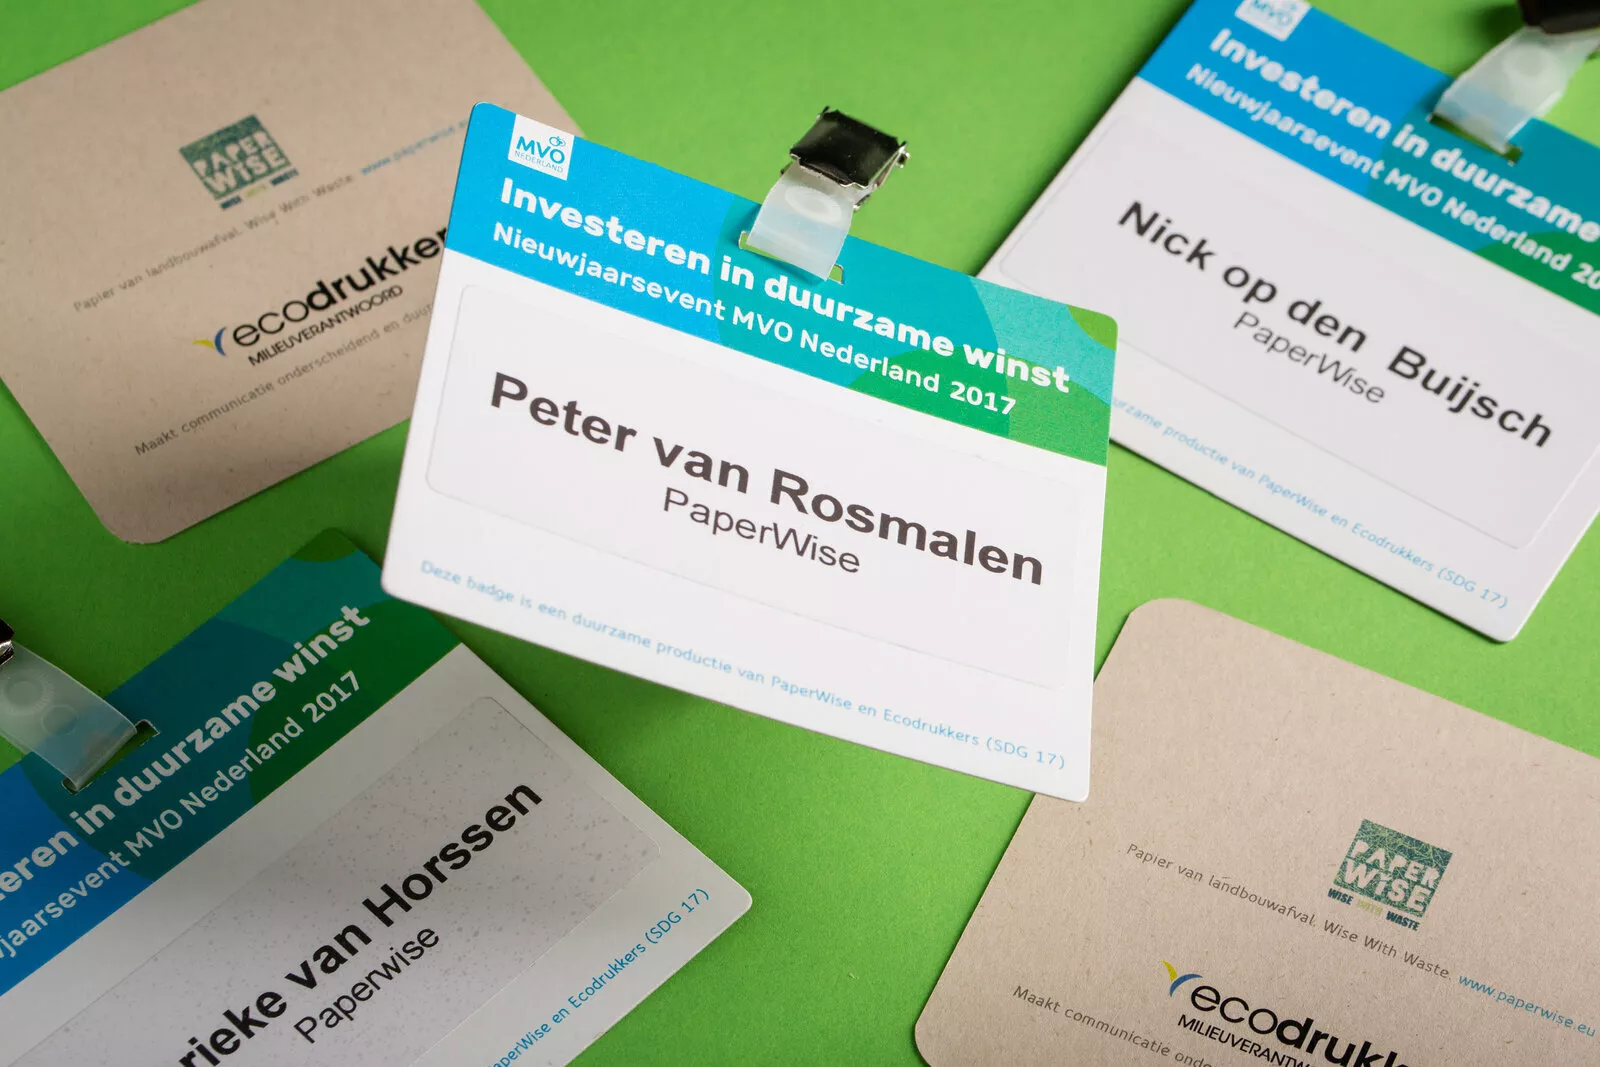 PaperWise sustainable paper board eco friendly name badge printing office promo tradeshow congres businesscard